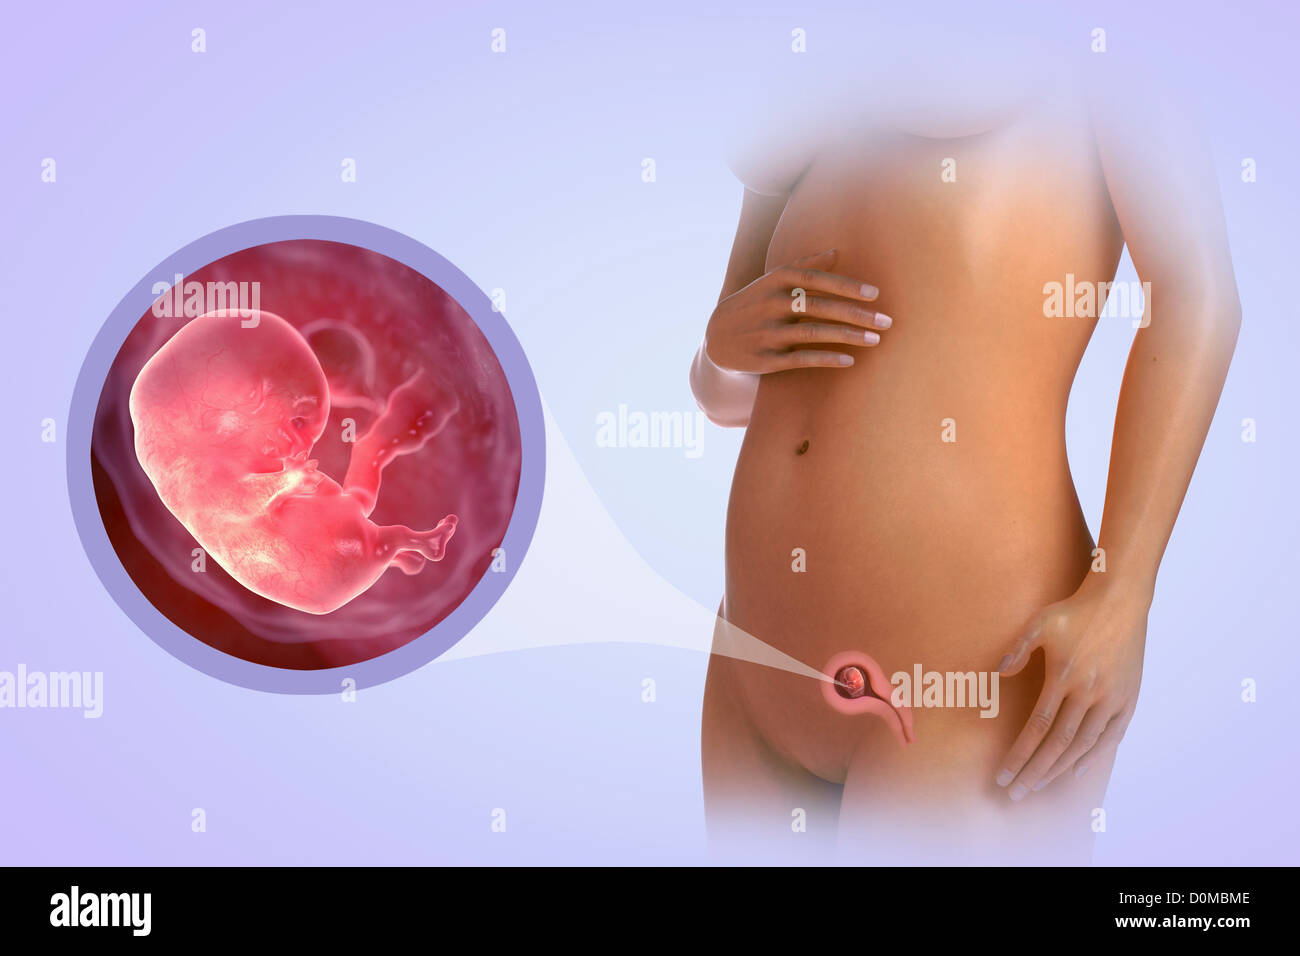 A human model showing pregnancy at week 9. Stock Photo